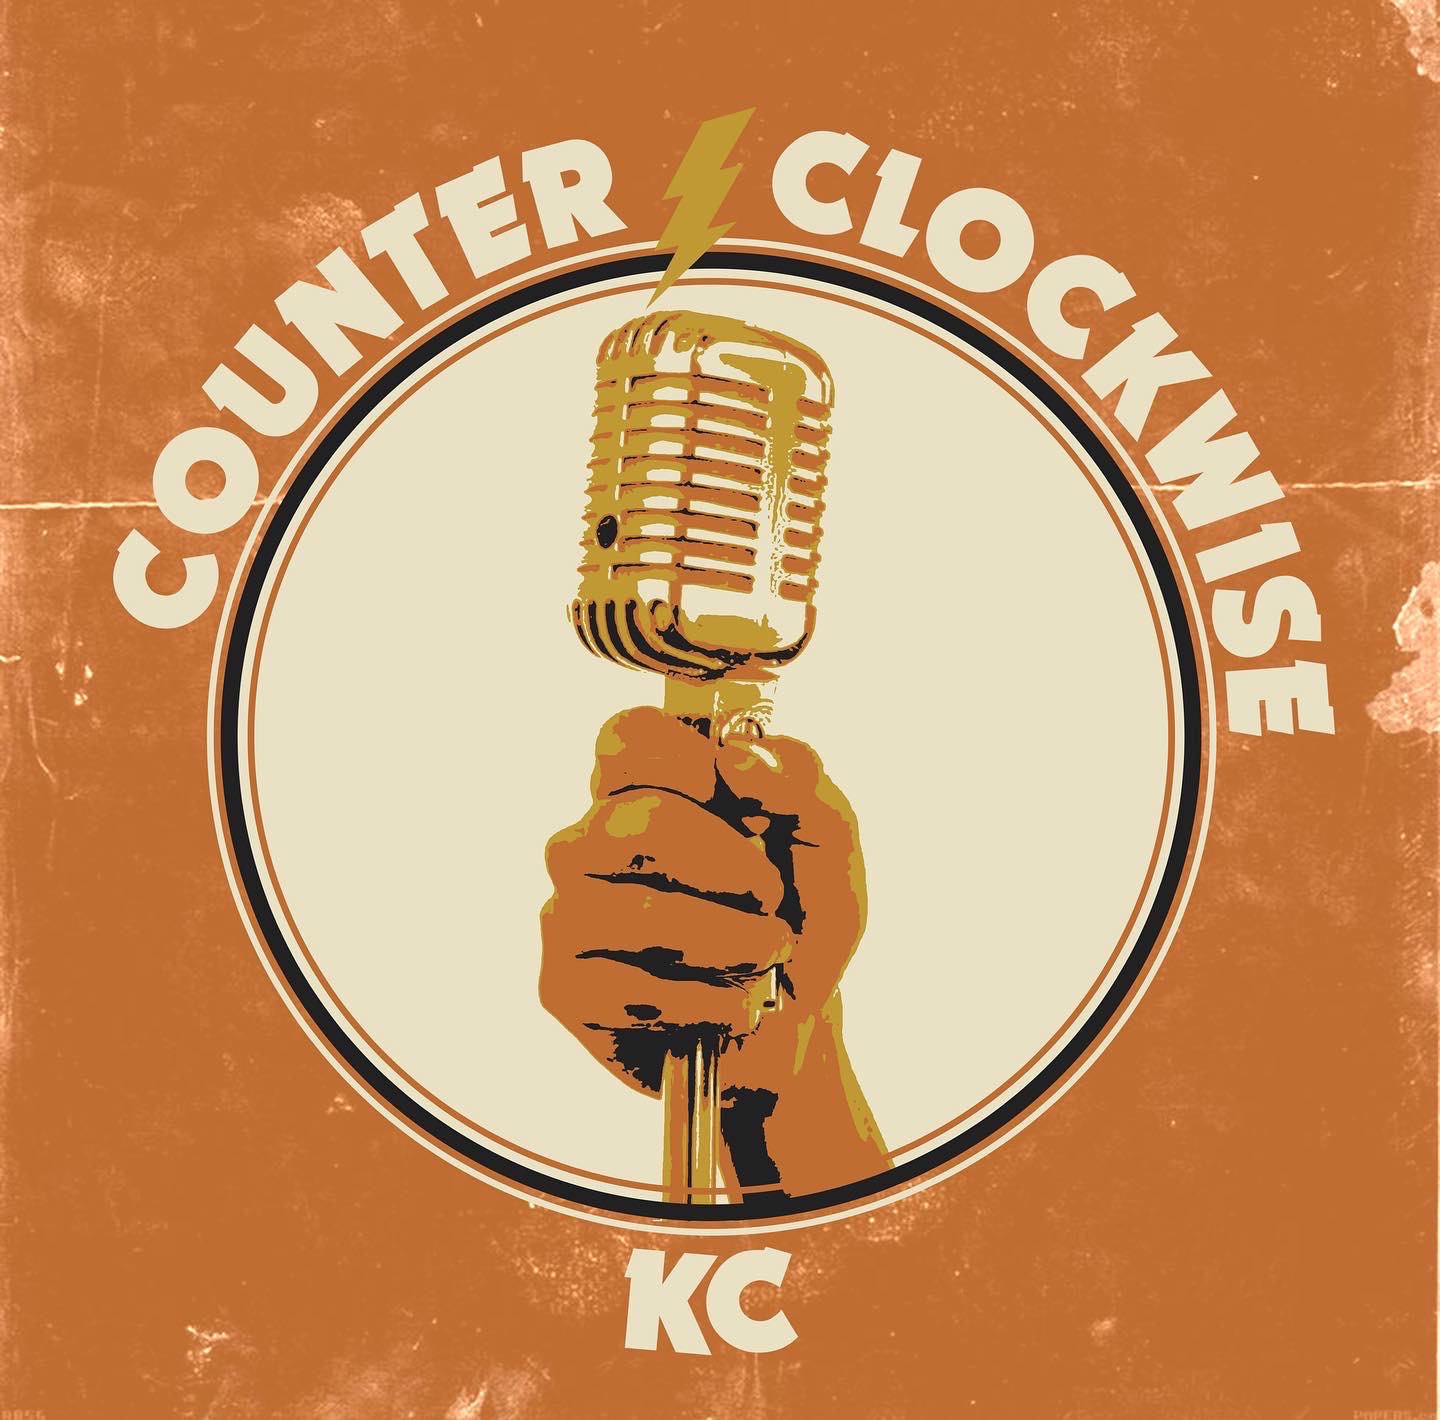 Art for CCKC Radio! by CounterclockwiseKC Radio